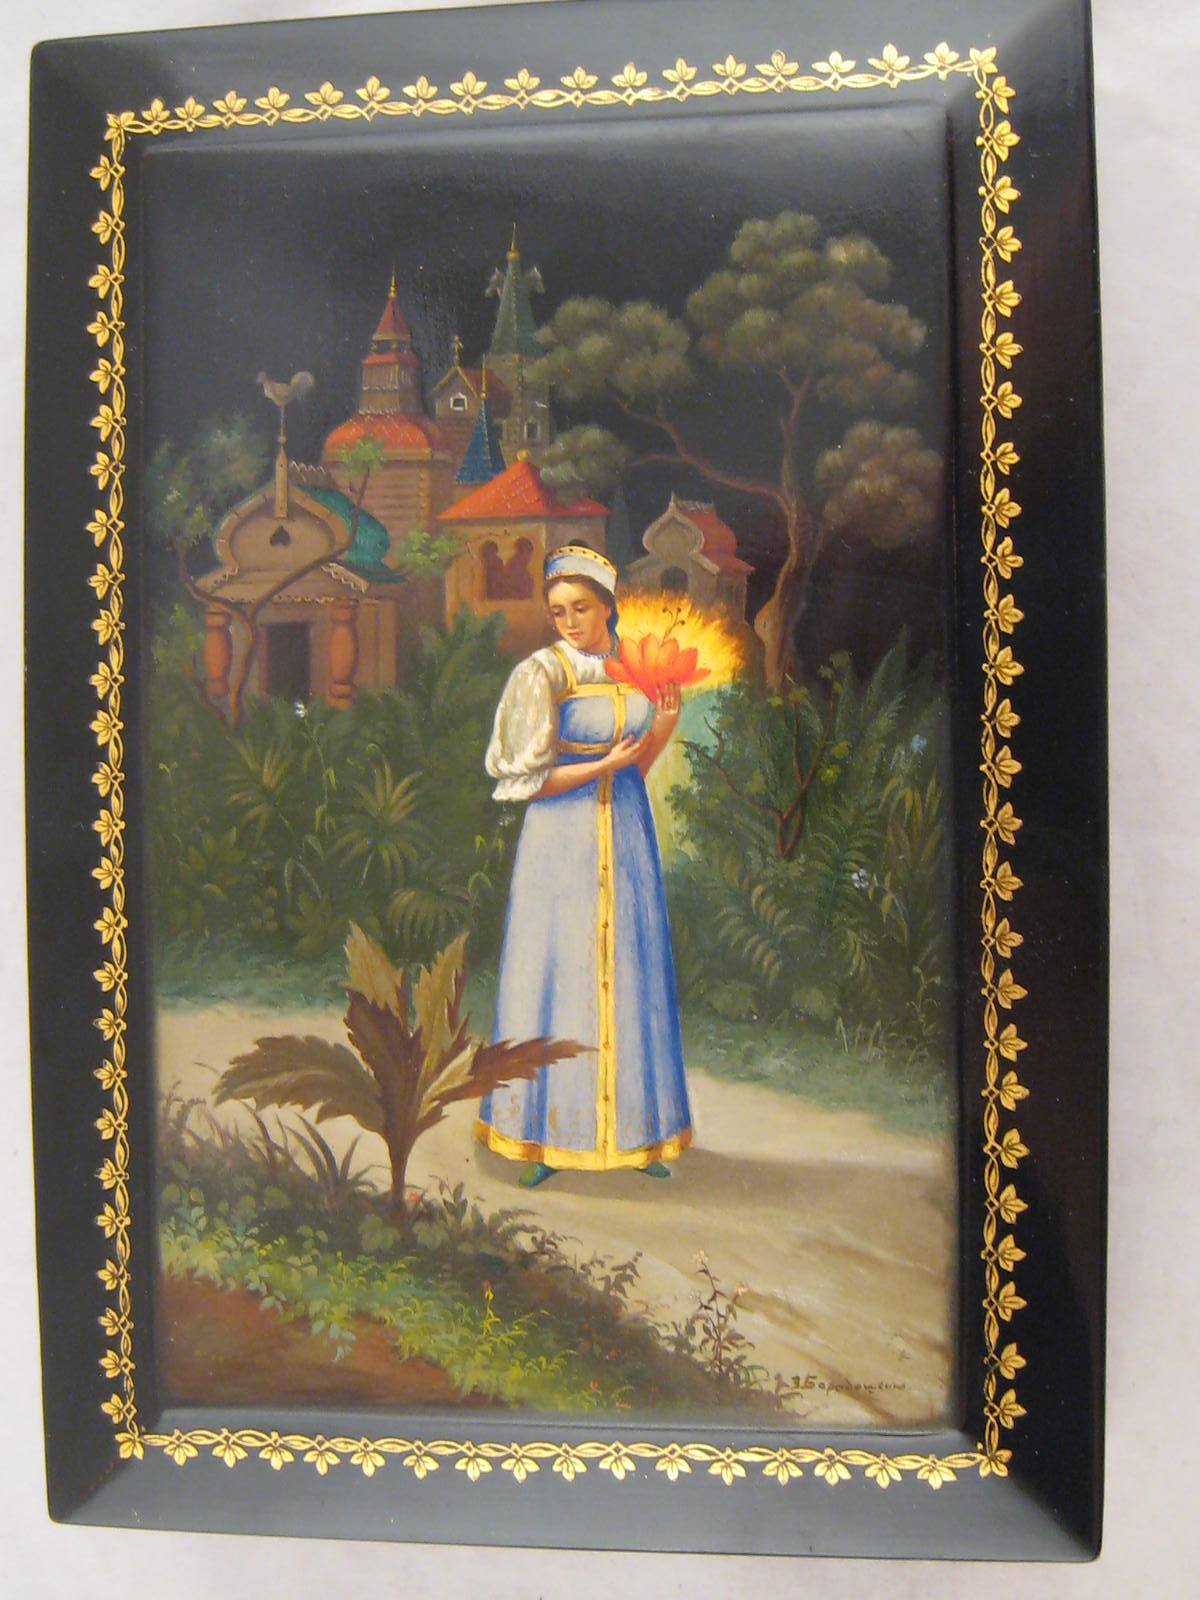 A large Russian lacquer box, signed Fedoskino, 1956, 23 x 16 x 8cm high.